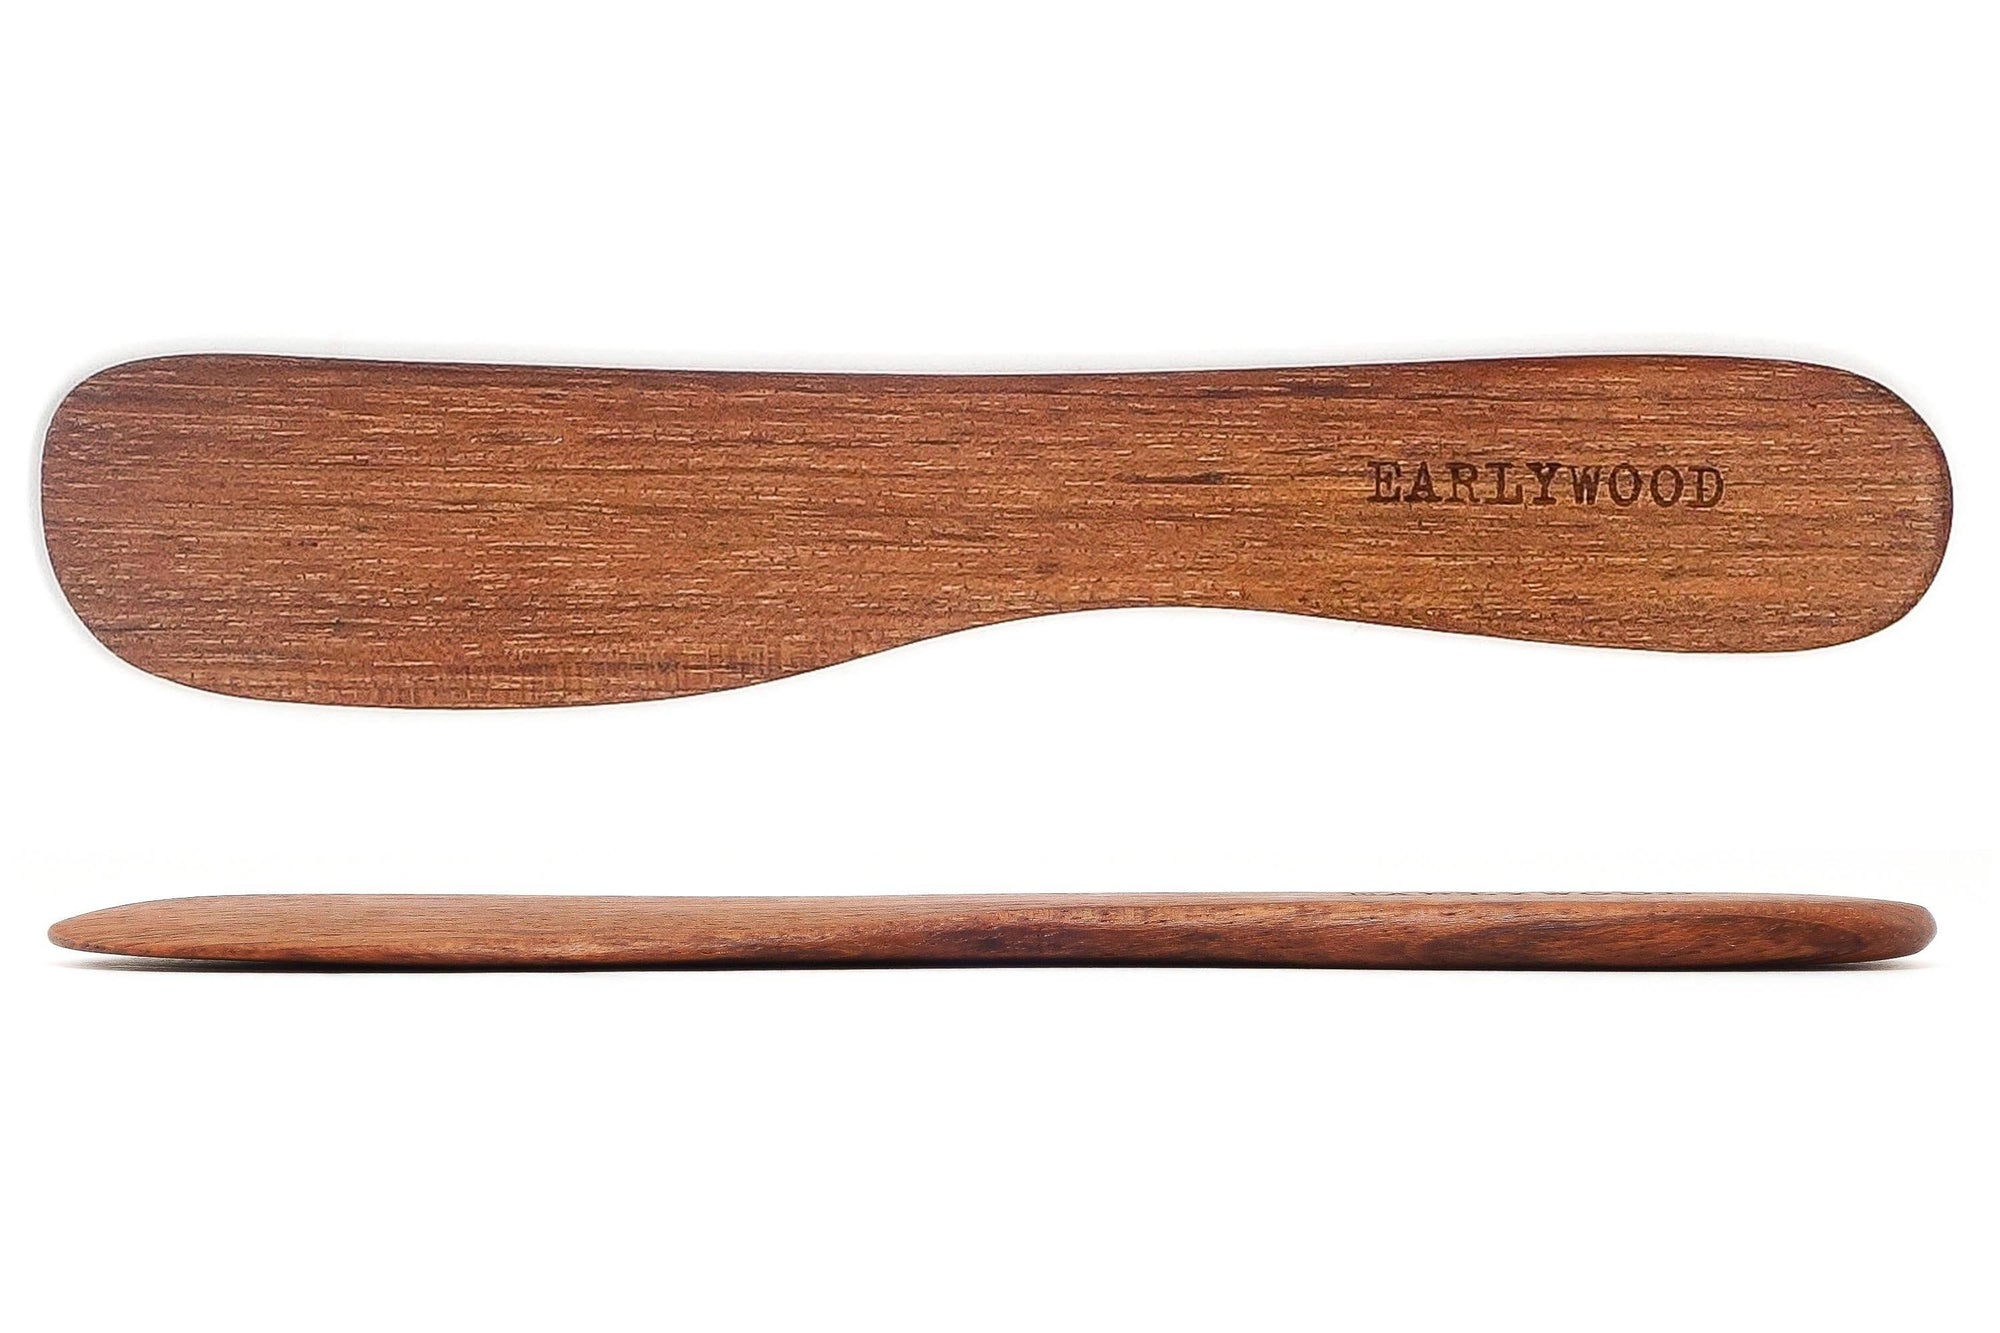 wooden butter spreader - handmade from Jatoba by Earlywood